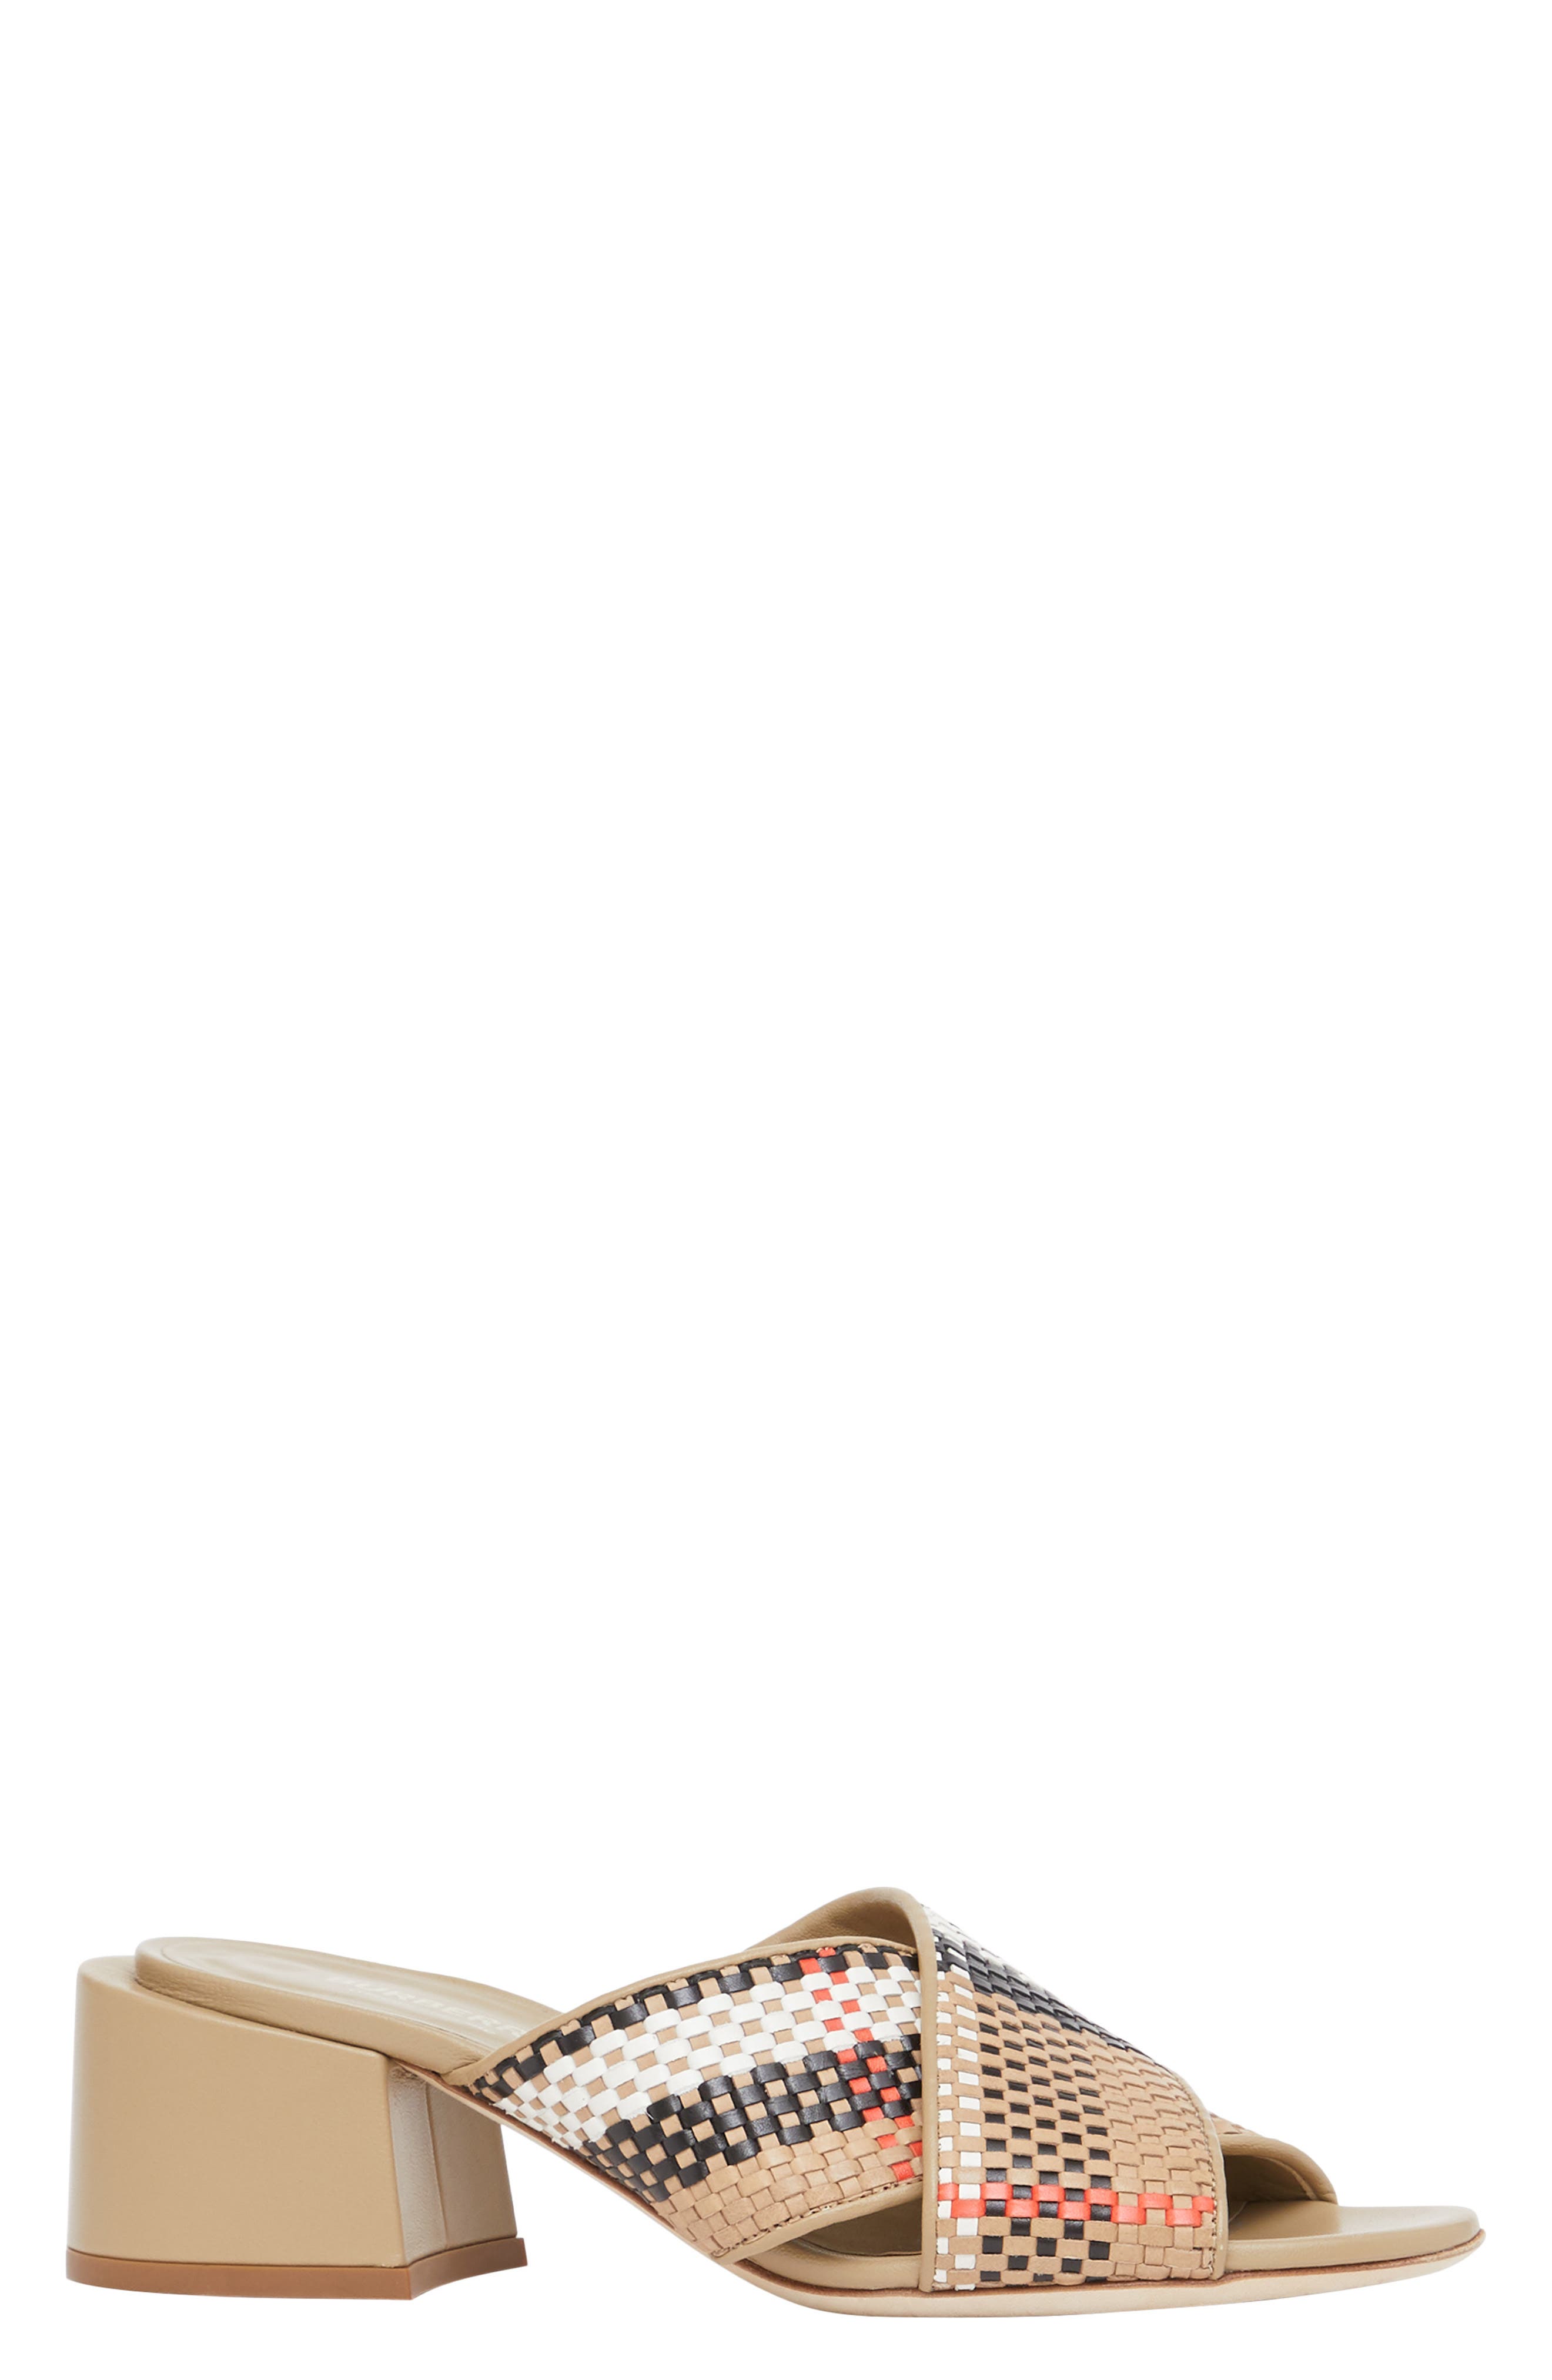 burberry sandals for women